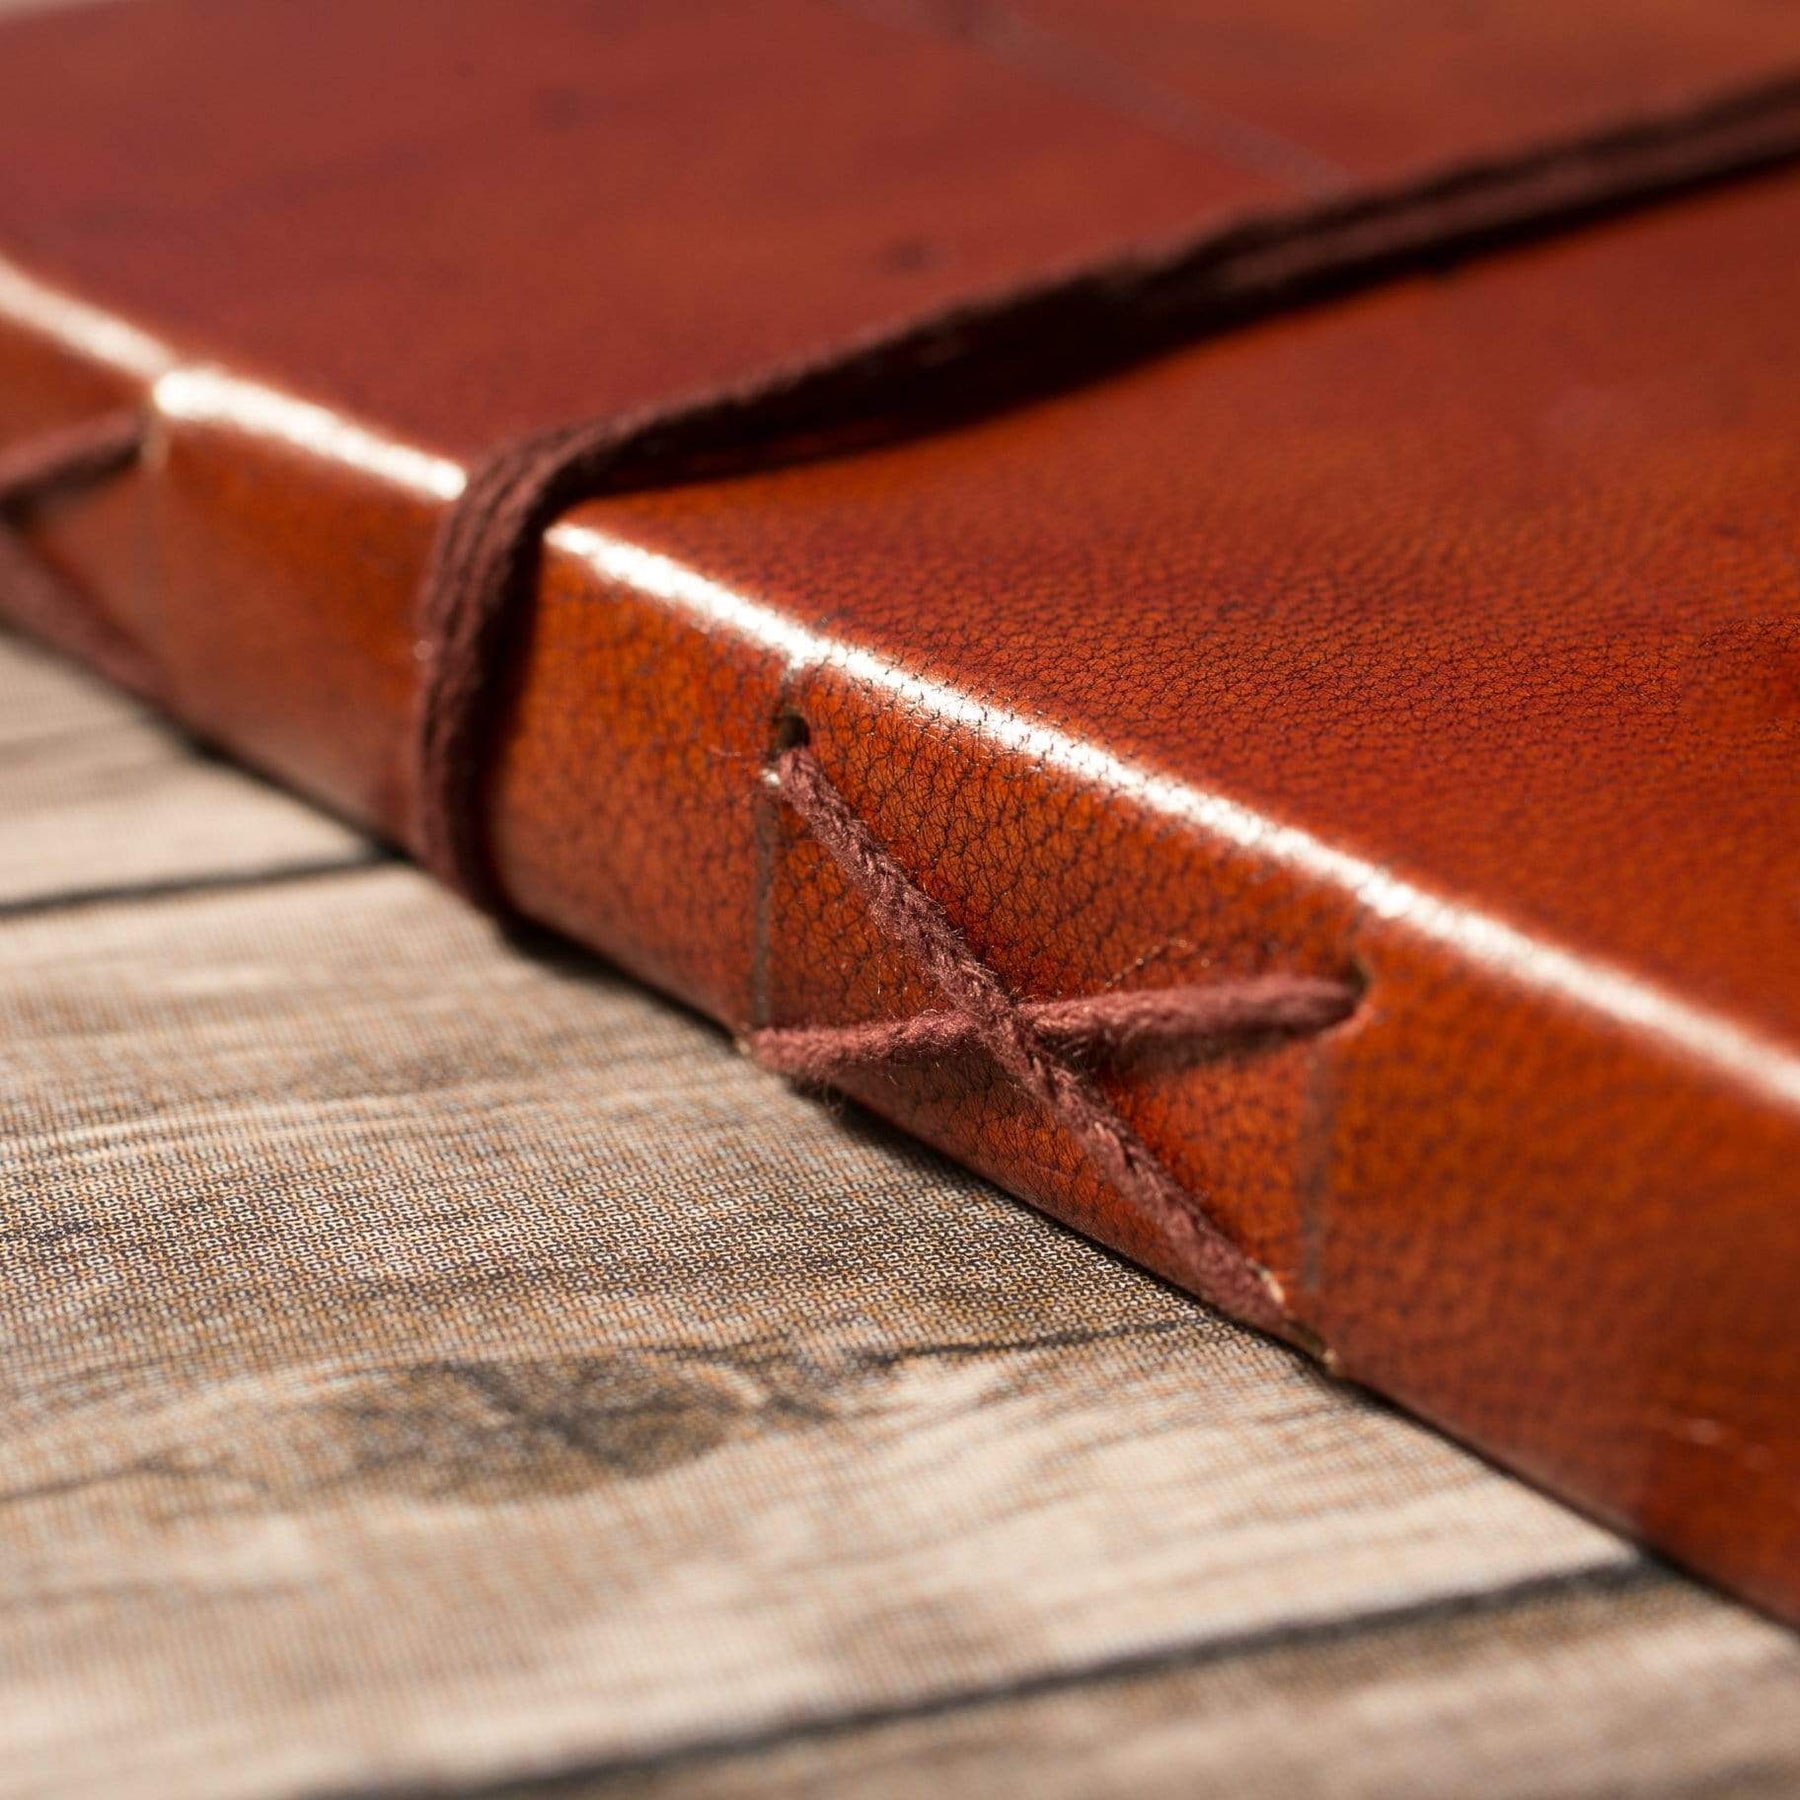 "The Future Belongs" Handmade Leather Journal - Leather Journals By Soothi